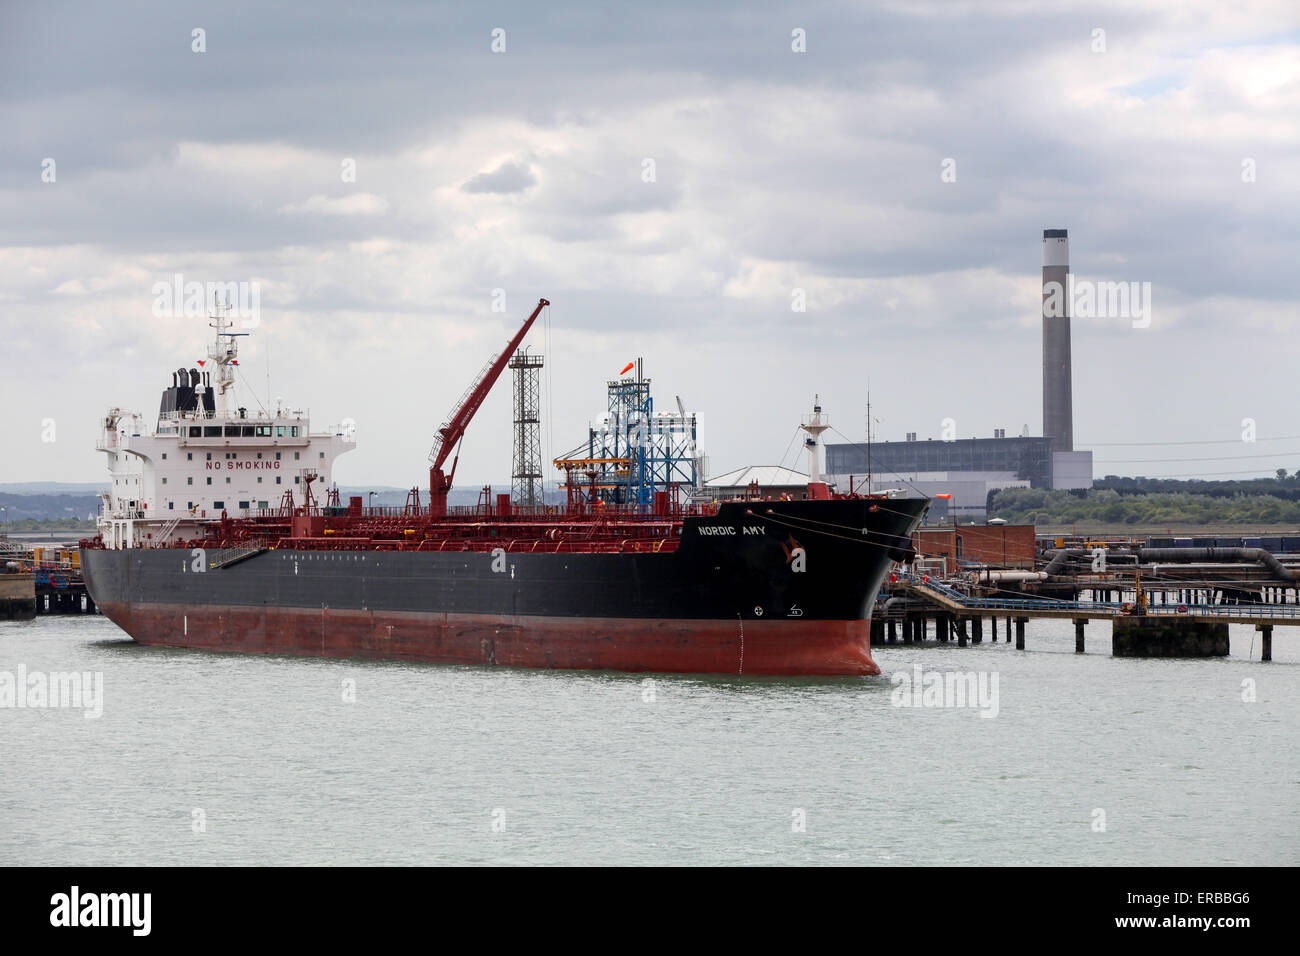 Nordic Amy Oil tanker ship pictured at Fawley Refinery near Southampton UK Stock Photo